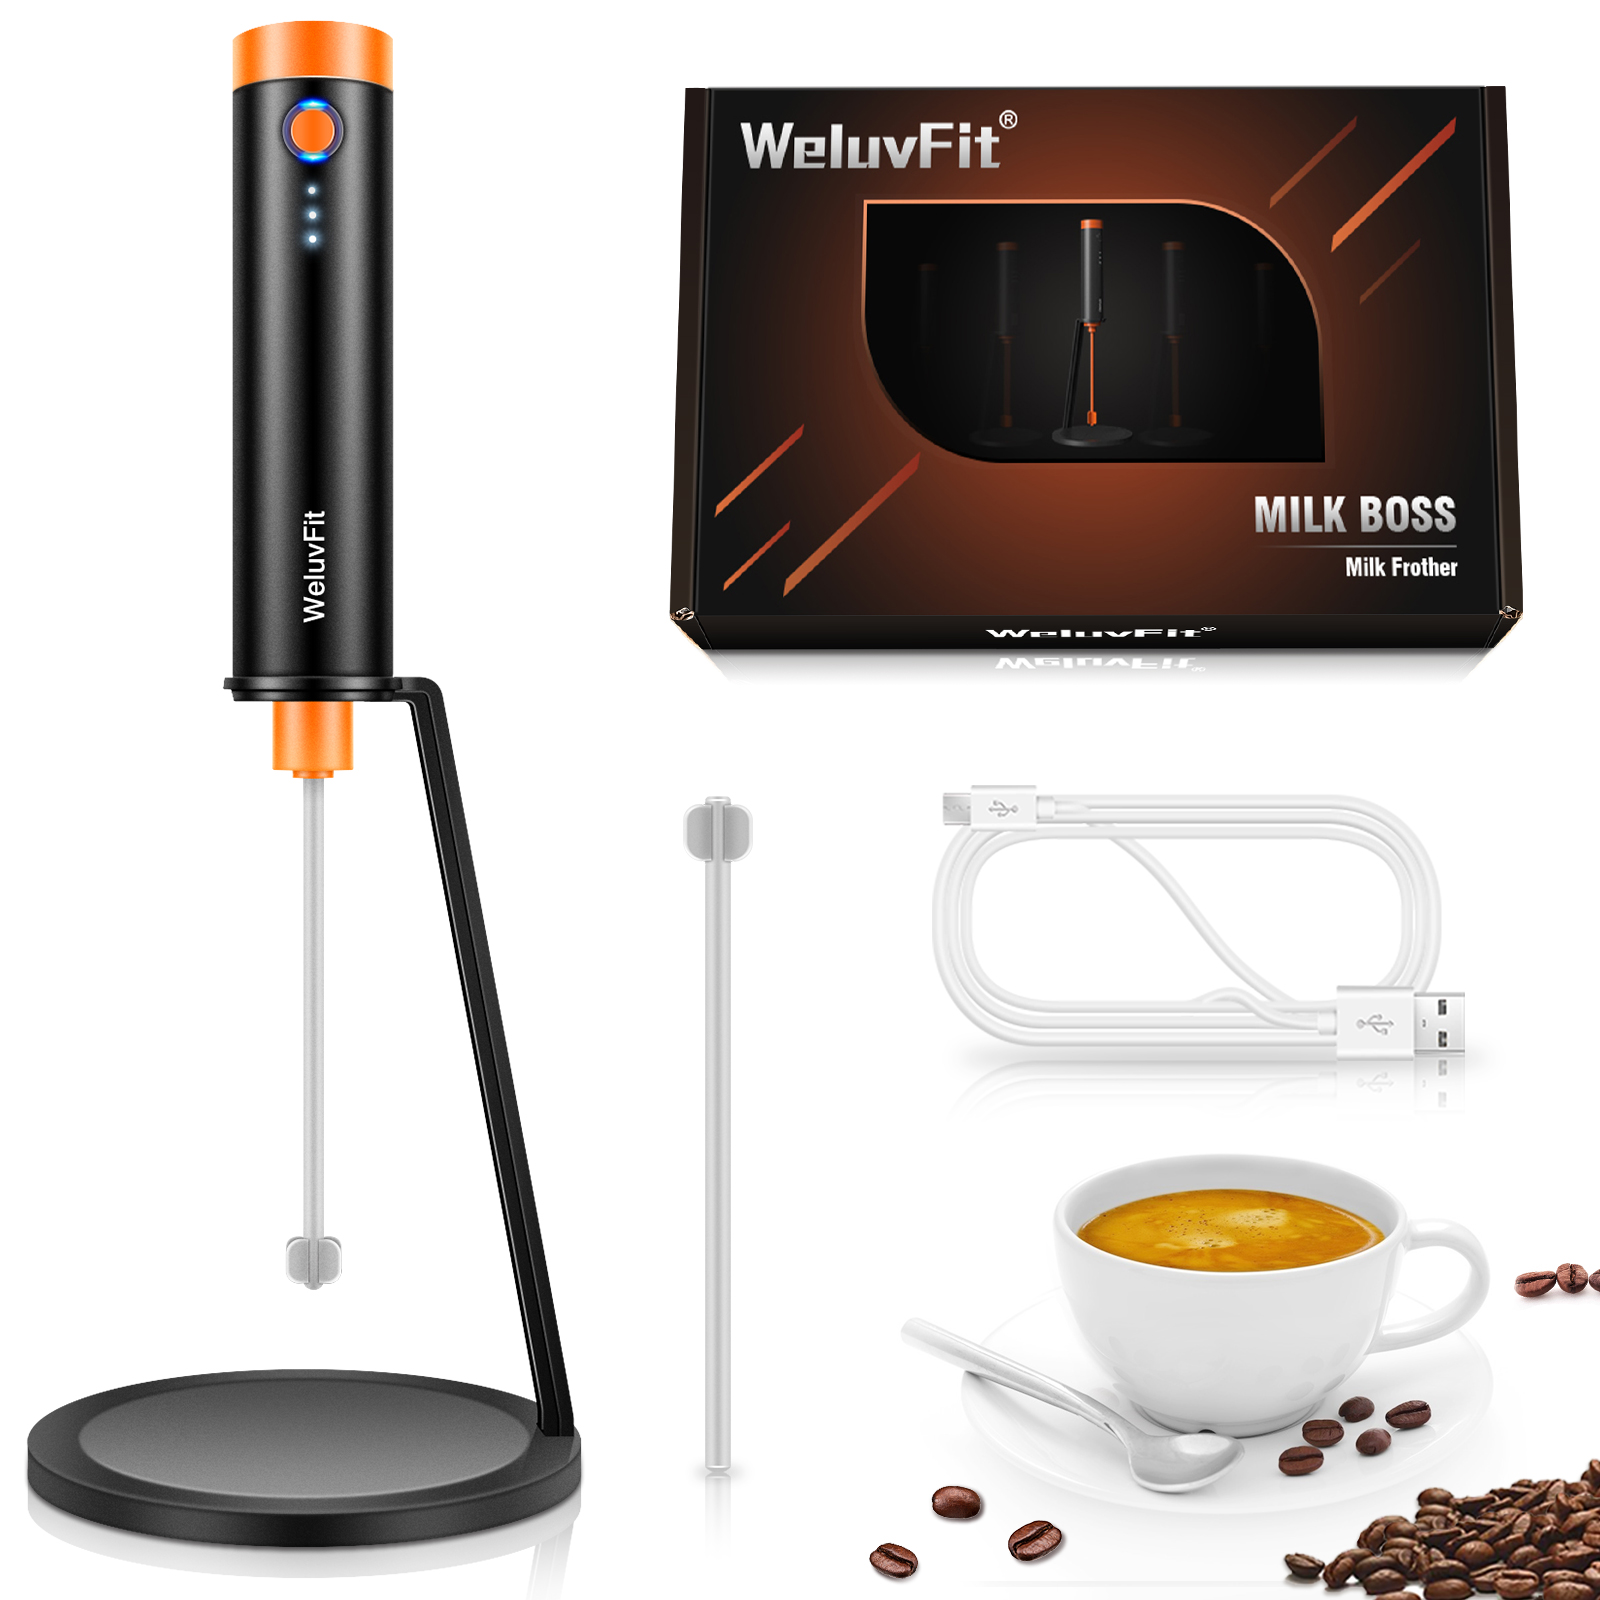 Upgraded Milk Frother, Weluvfit Drink Mixer with 3 Speeds, Handheld USB Rechargeable Milk Foamer with Stand, Food Grade Electric Whisk Coffee Blender, Portable Electric Stirrer for Lattes, Cappuccino